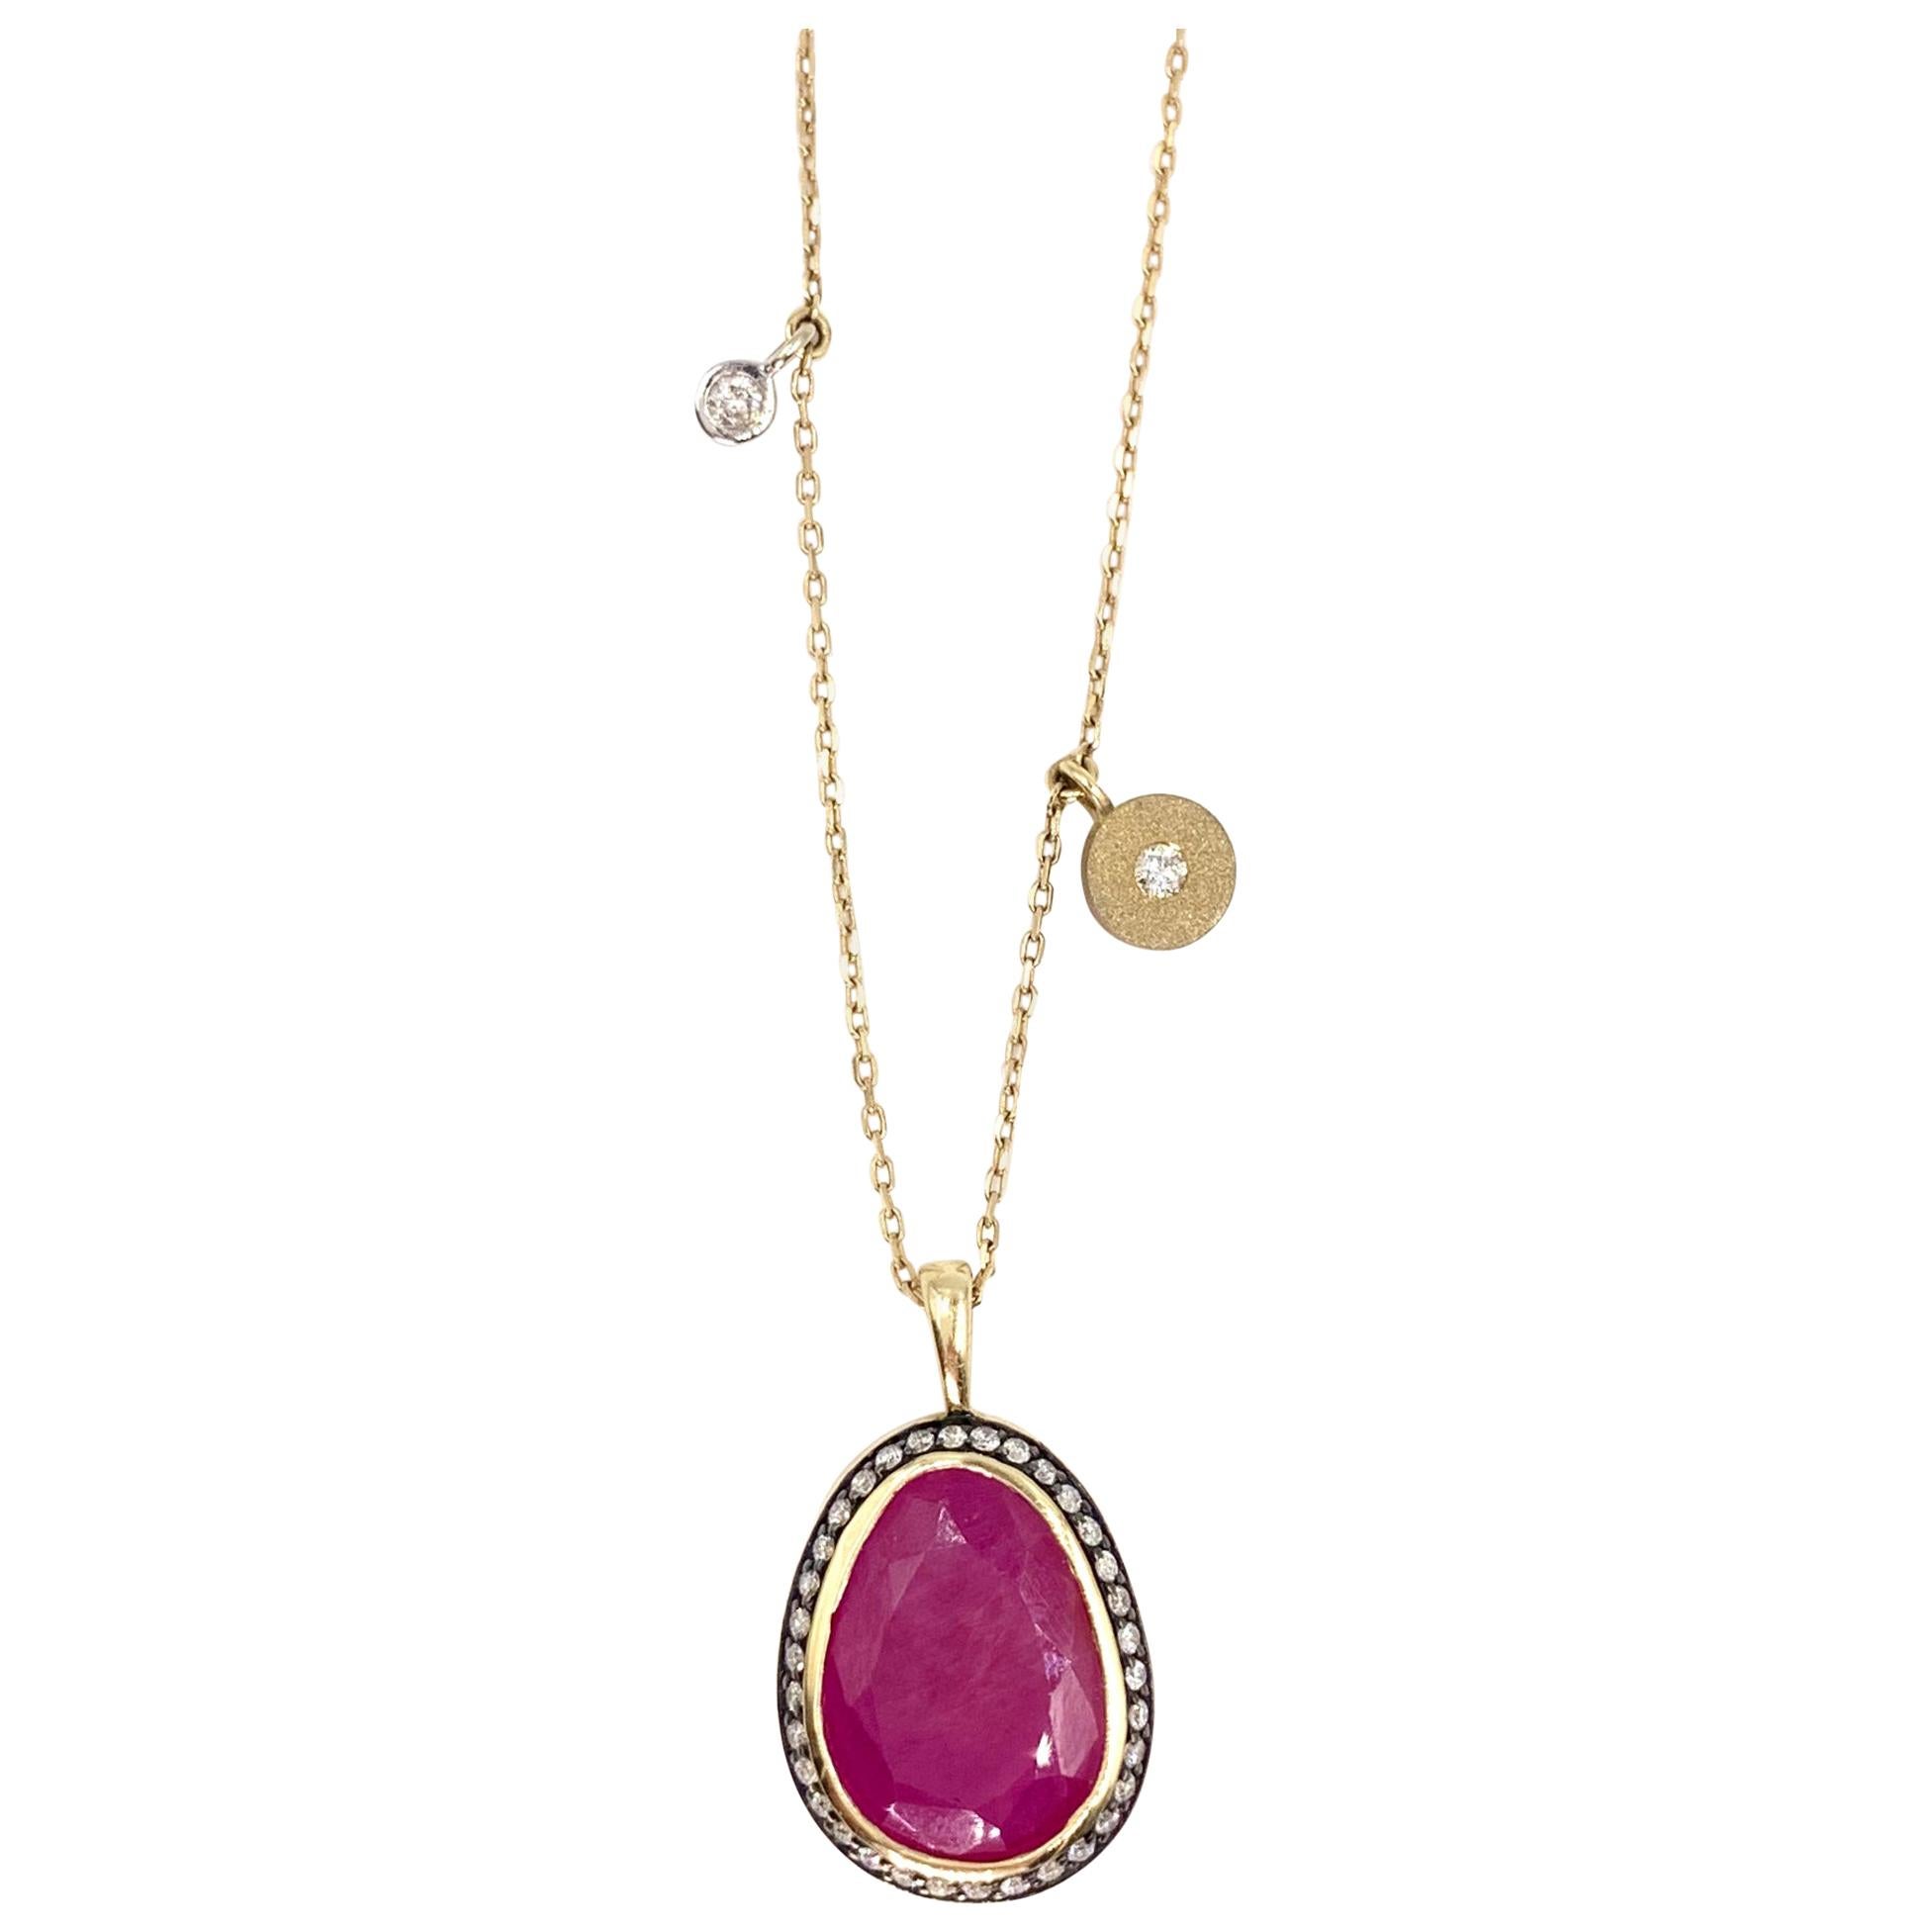 Yellow Gold Sliced Ruby and Diamond Pendant Necklace